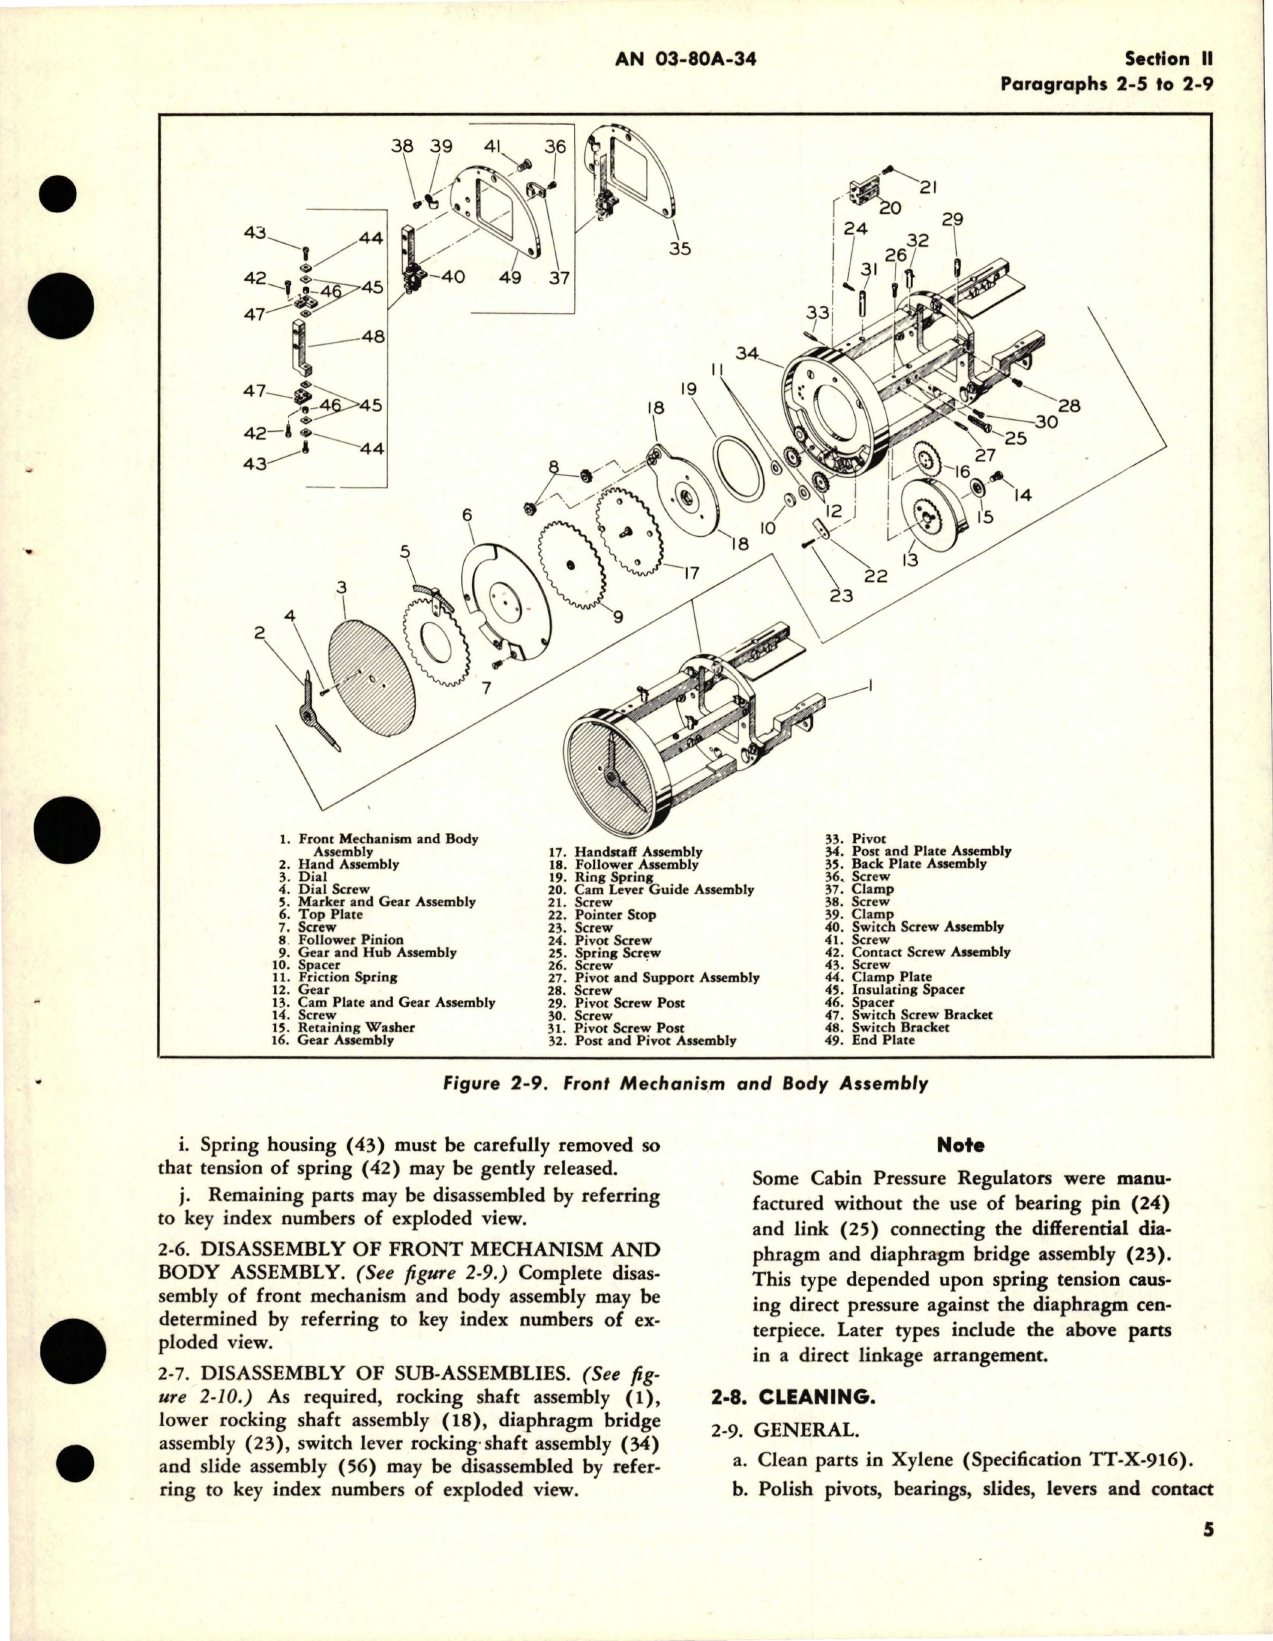 Sample page 9 from AirCorps Library document: Overhaul Instructions for Cabin Pressure Regulator 